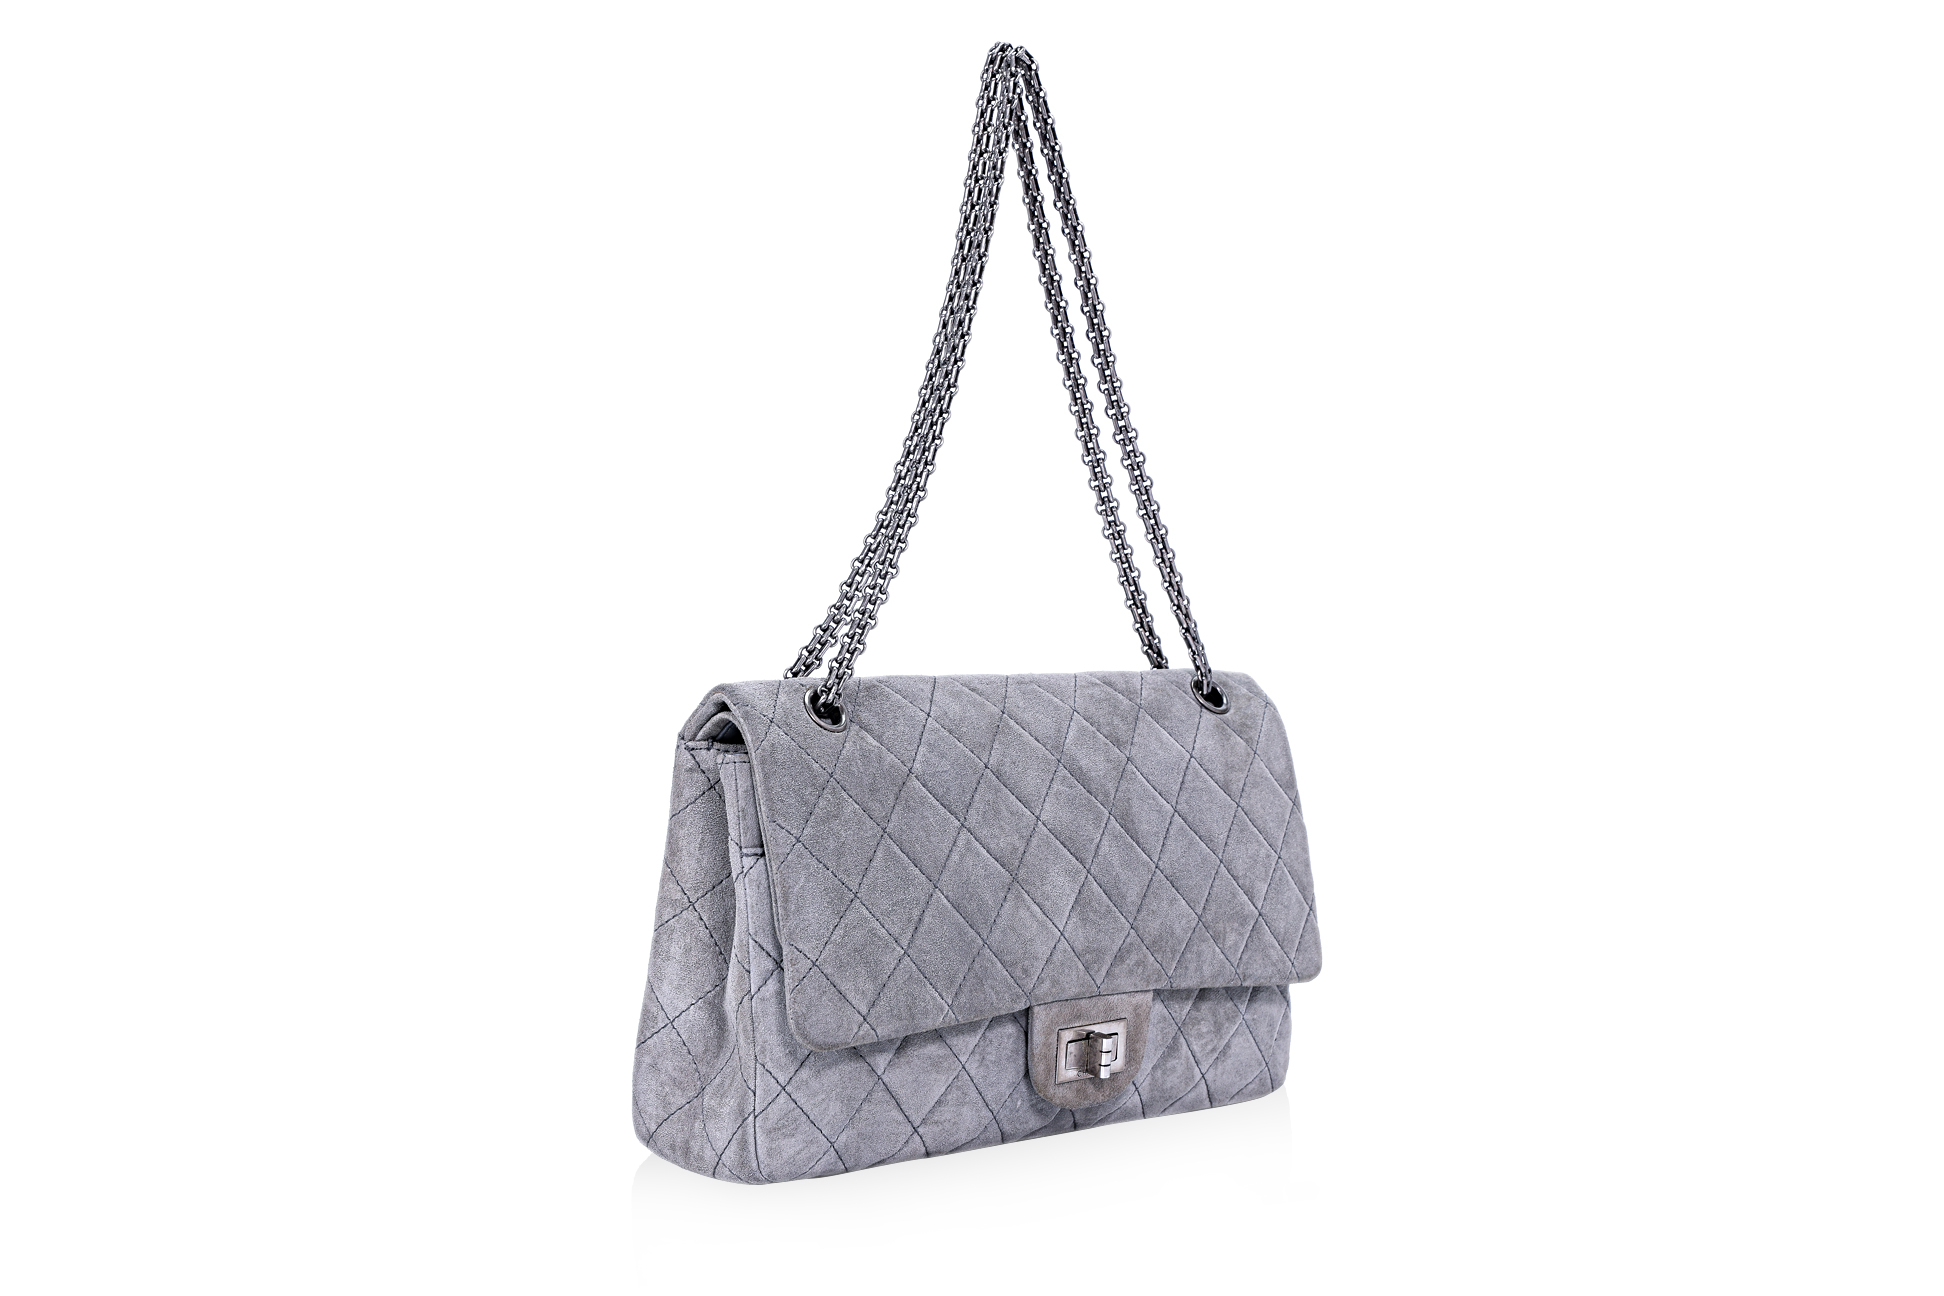 A CHANEL GREY REISSUE 227 DOUBLE FLAP BAG - Image 2 of 4